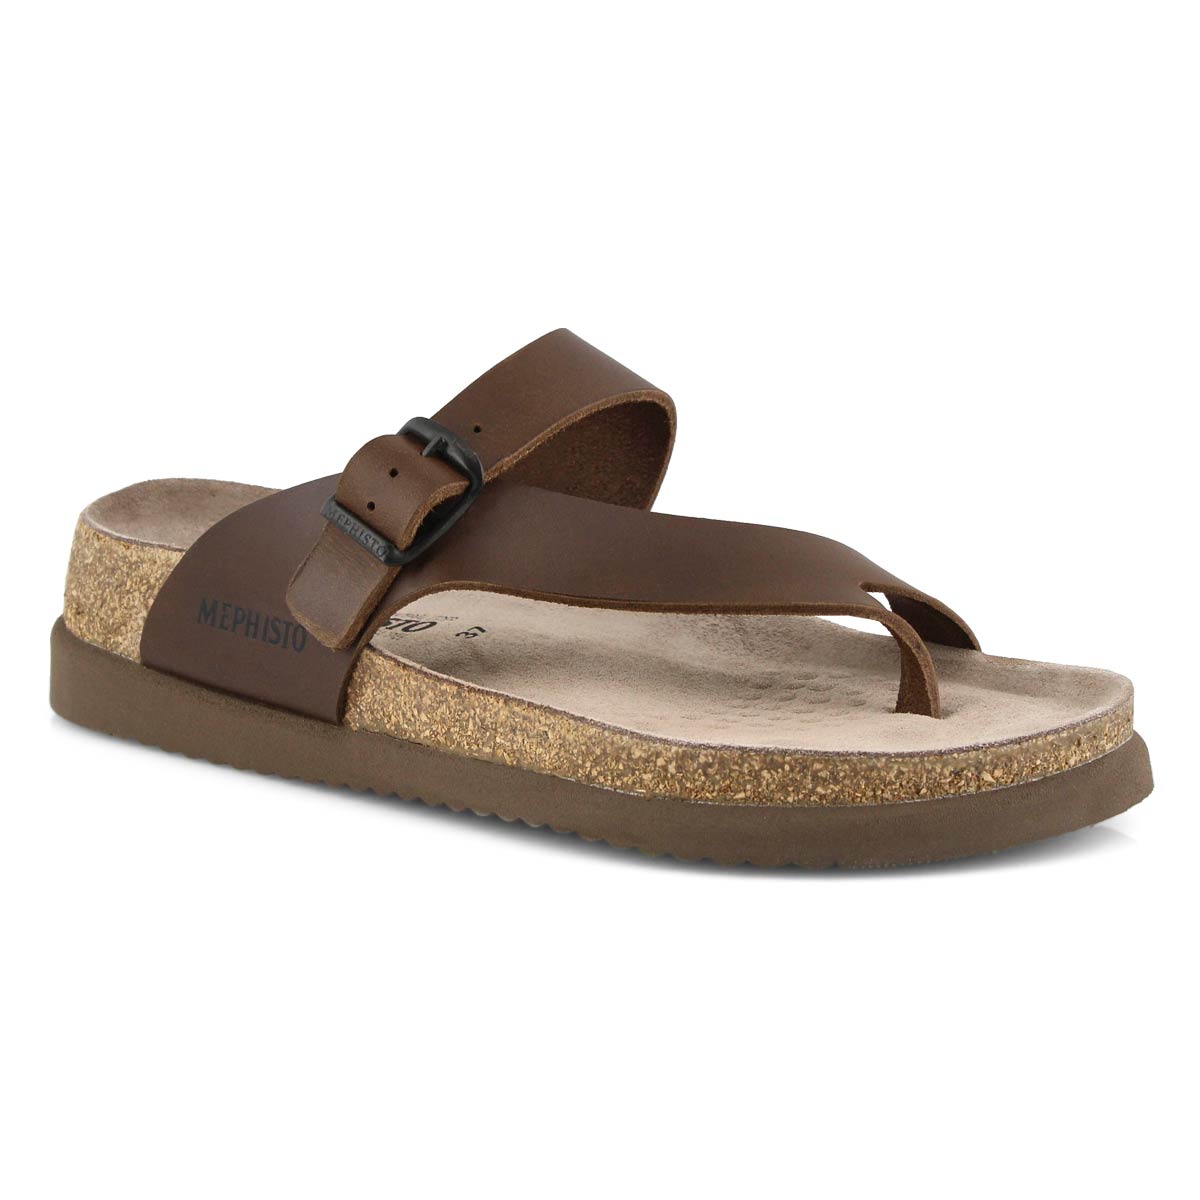 mephisto prudy sandal with arch support